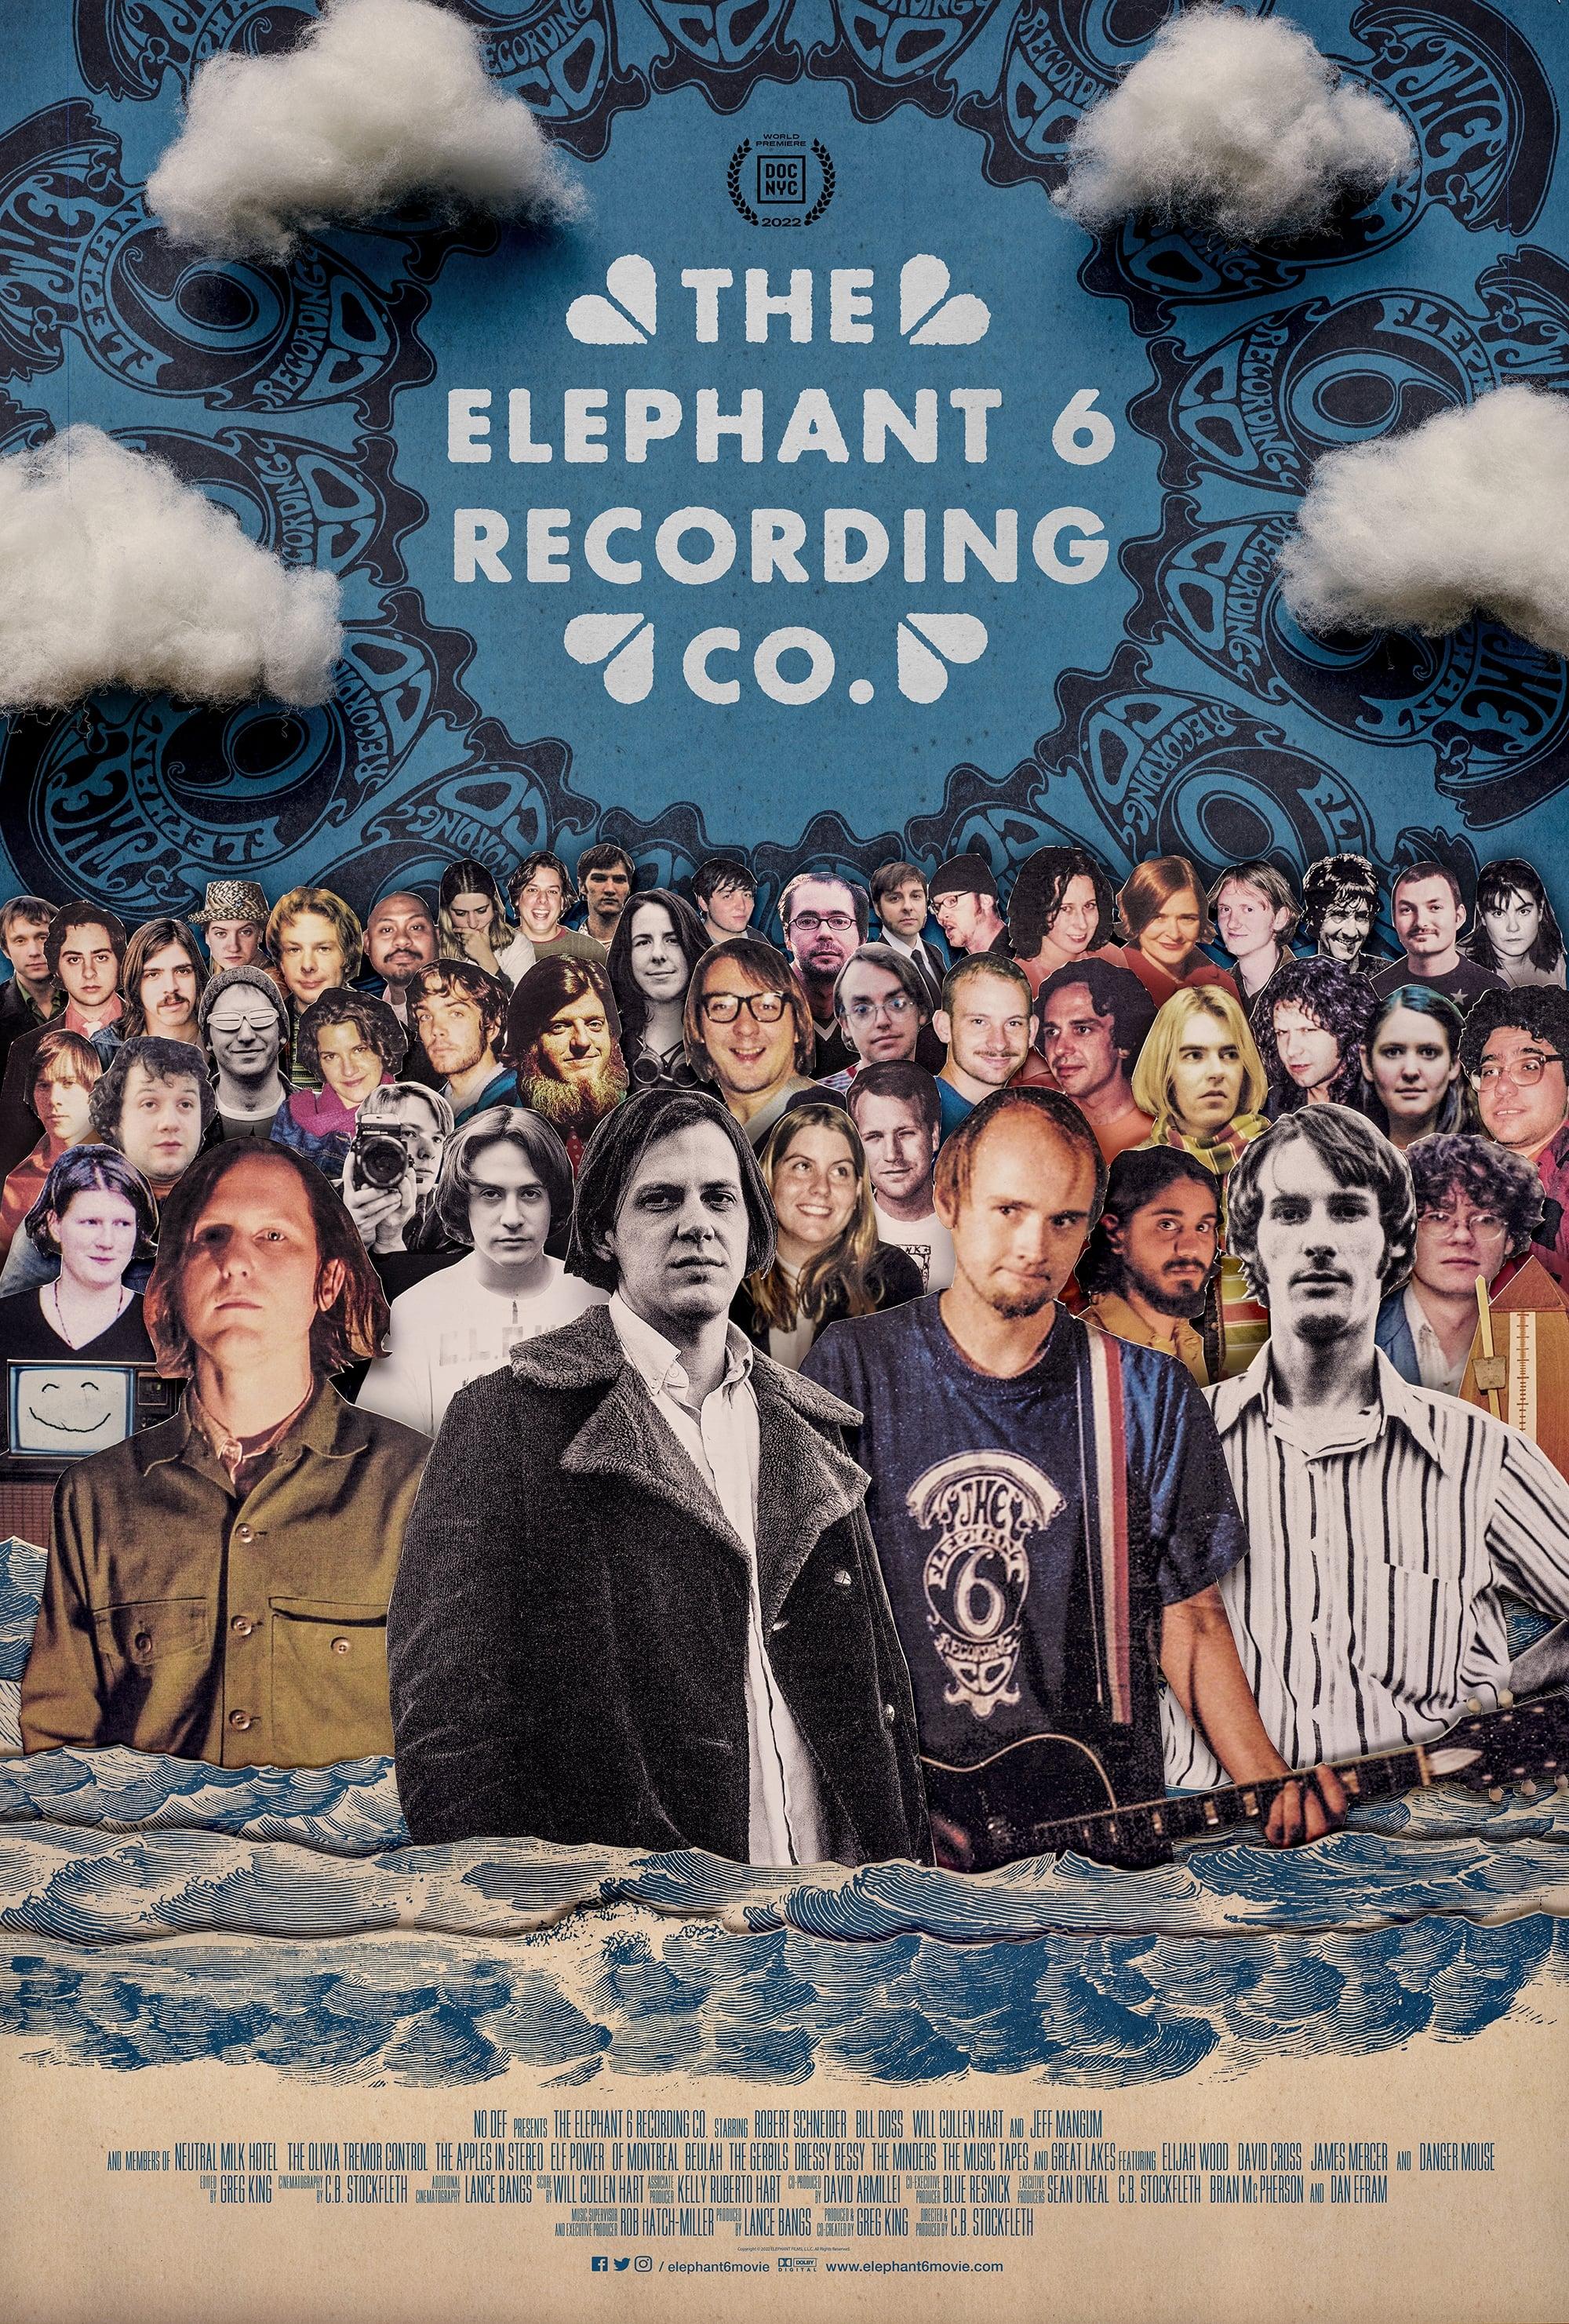 The Elephant 6 Recording Co. poster